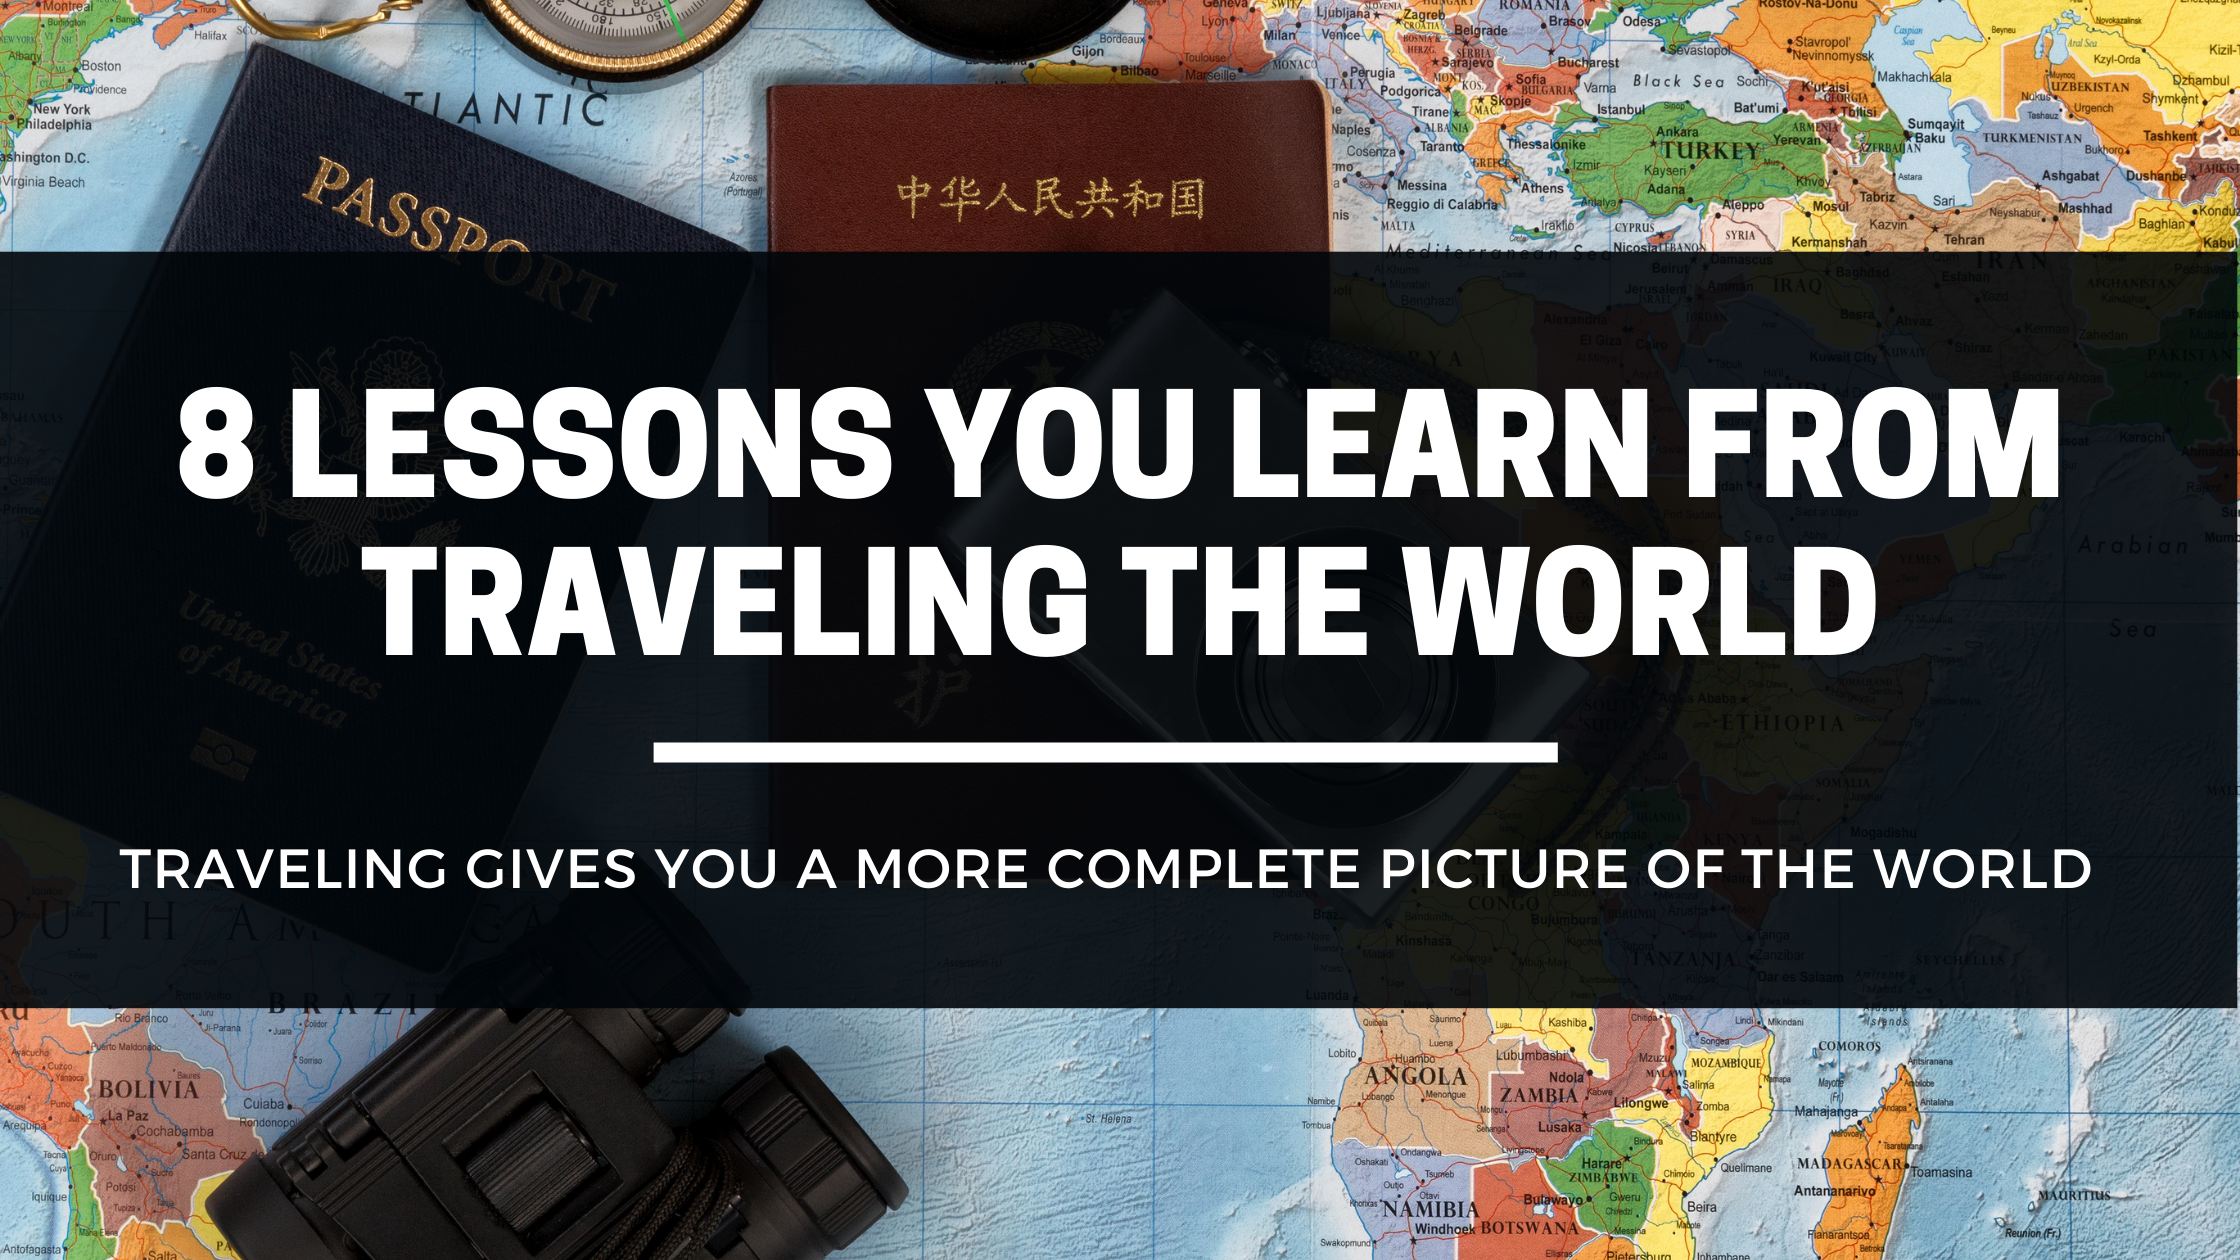 8 Lessons You Learn From Traveling The World